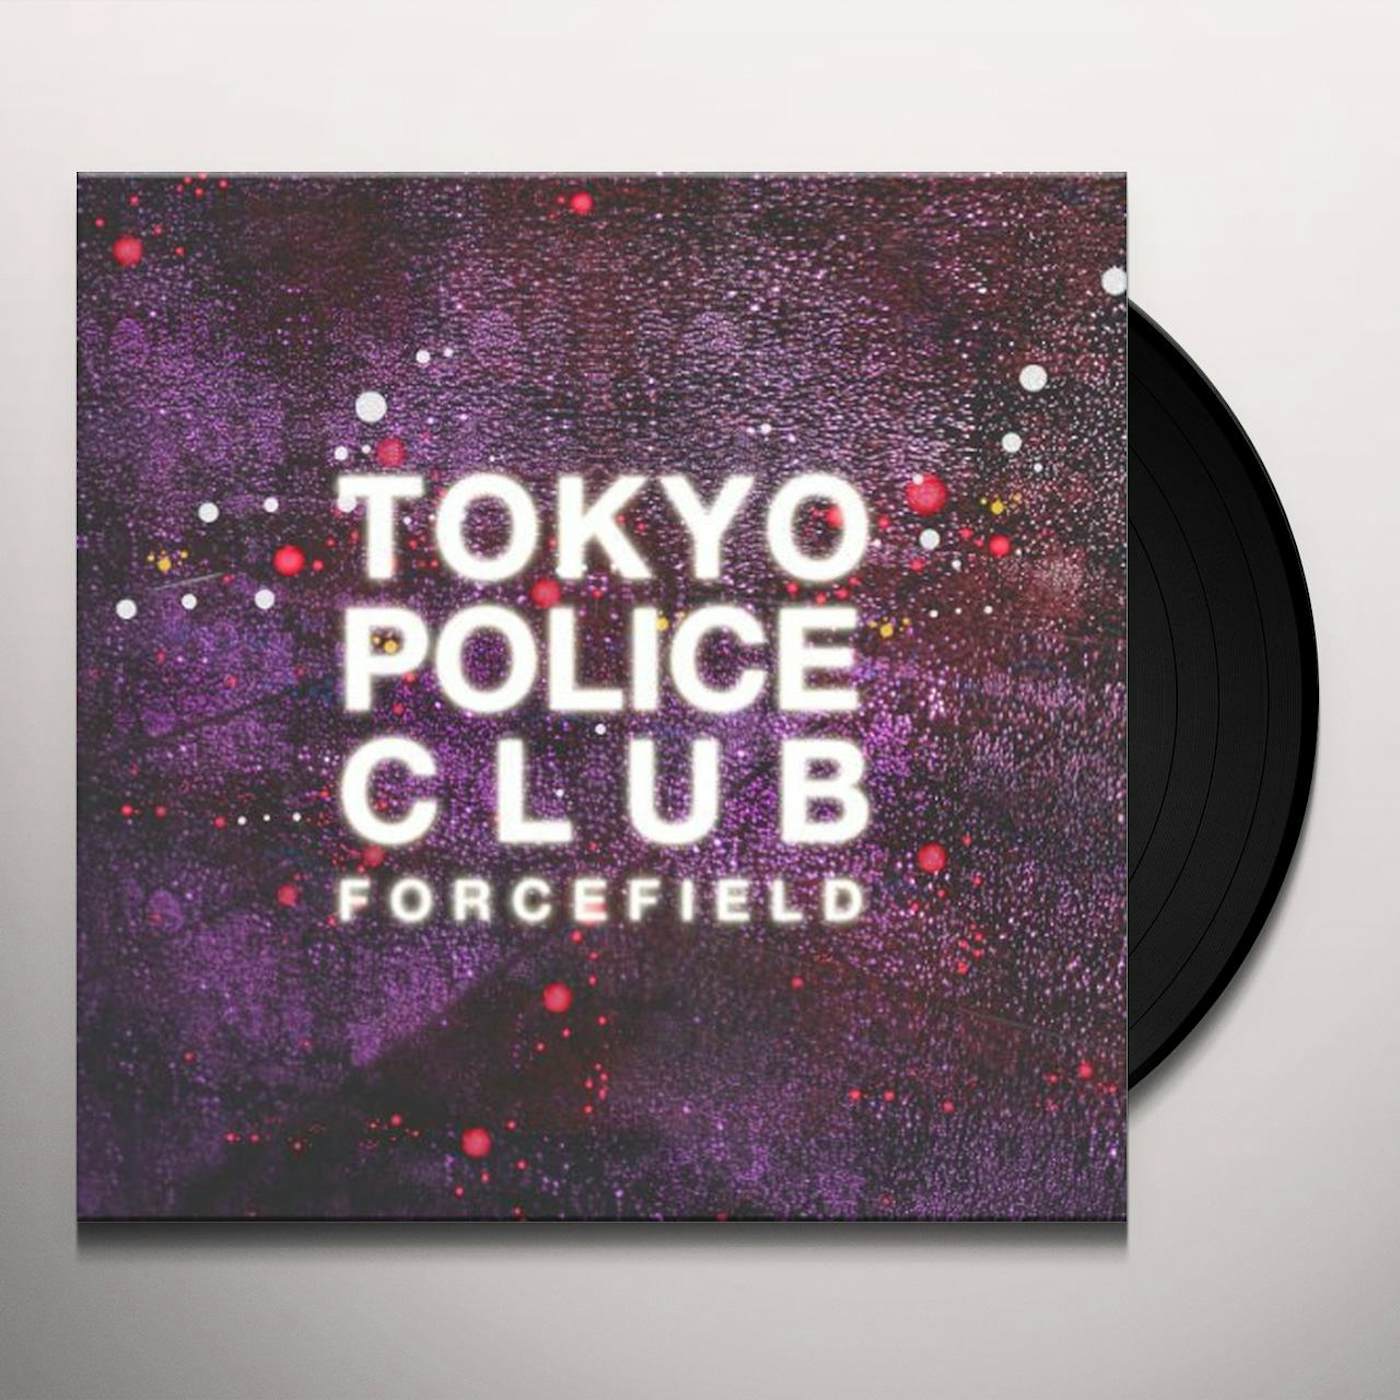 Tokyo Police Club Forcefield Vinyl Record